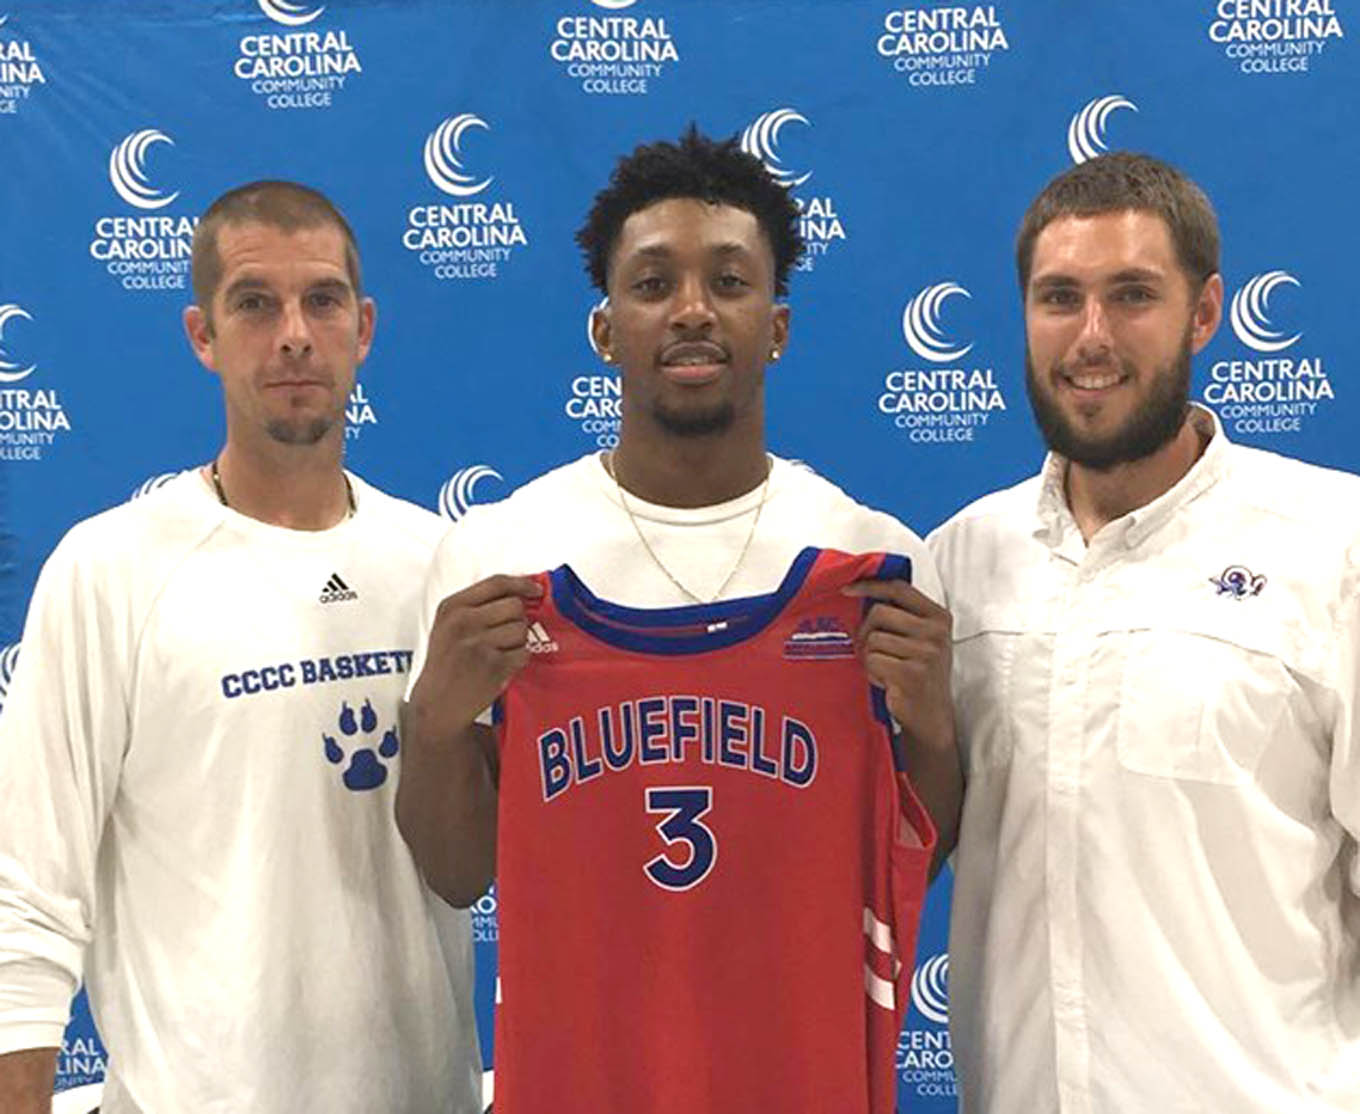 CCCC's Chris George signs with Bluefield College